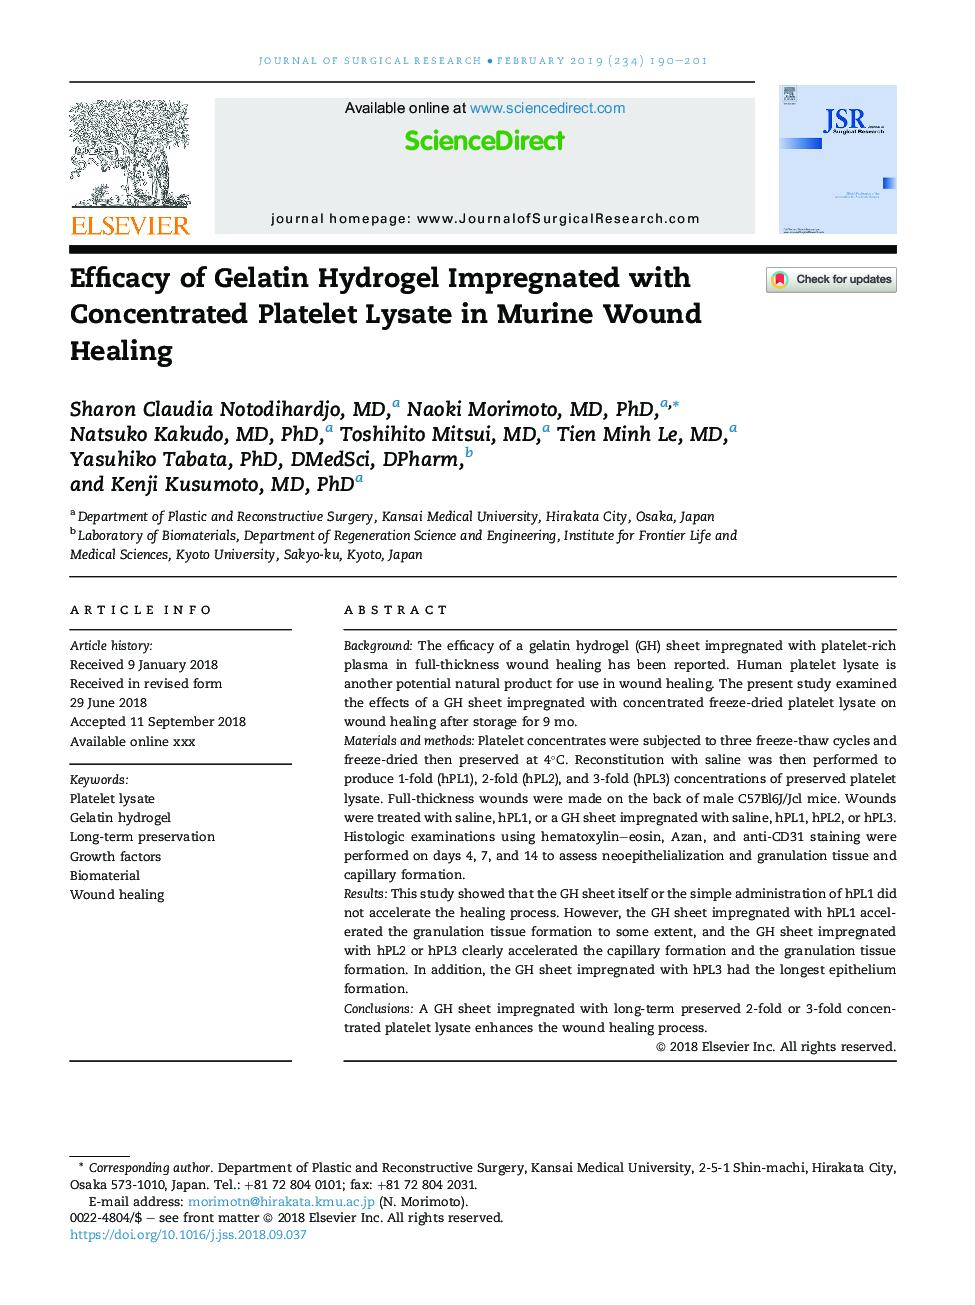 Efficacy of Gelatin Hydrogel Impregnated with Concentrated Platelet Lysate in Murine Wound Healing